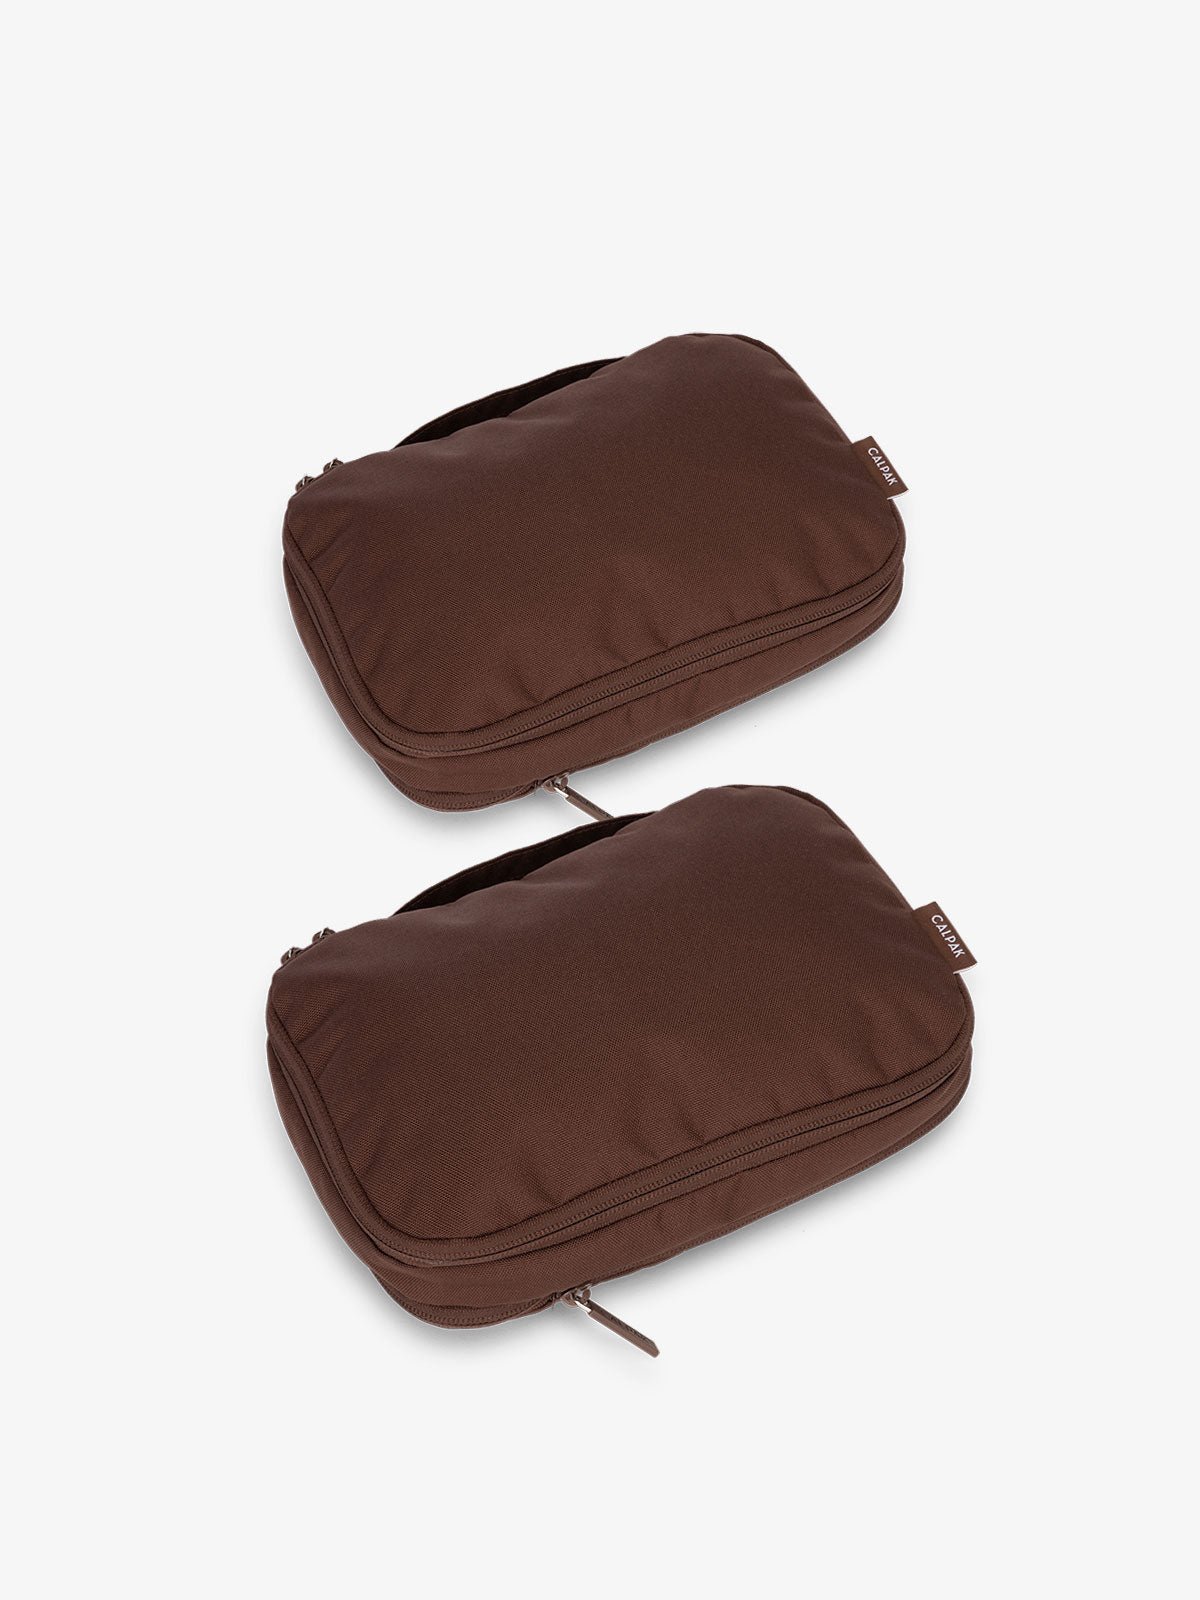 CALPAK small compression packing cubes in dark brown walnut